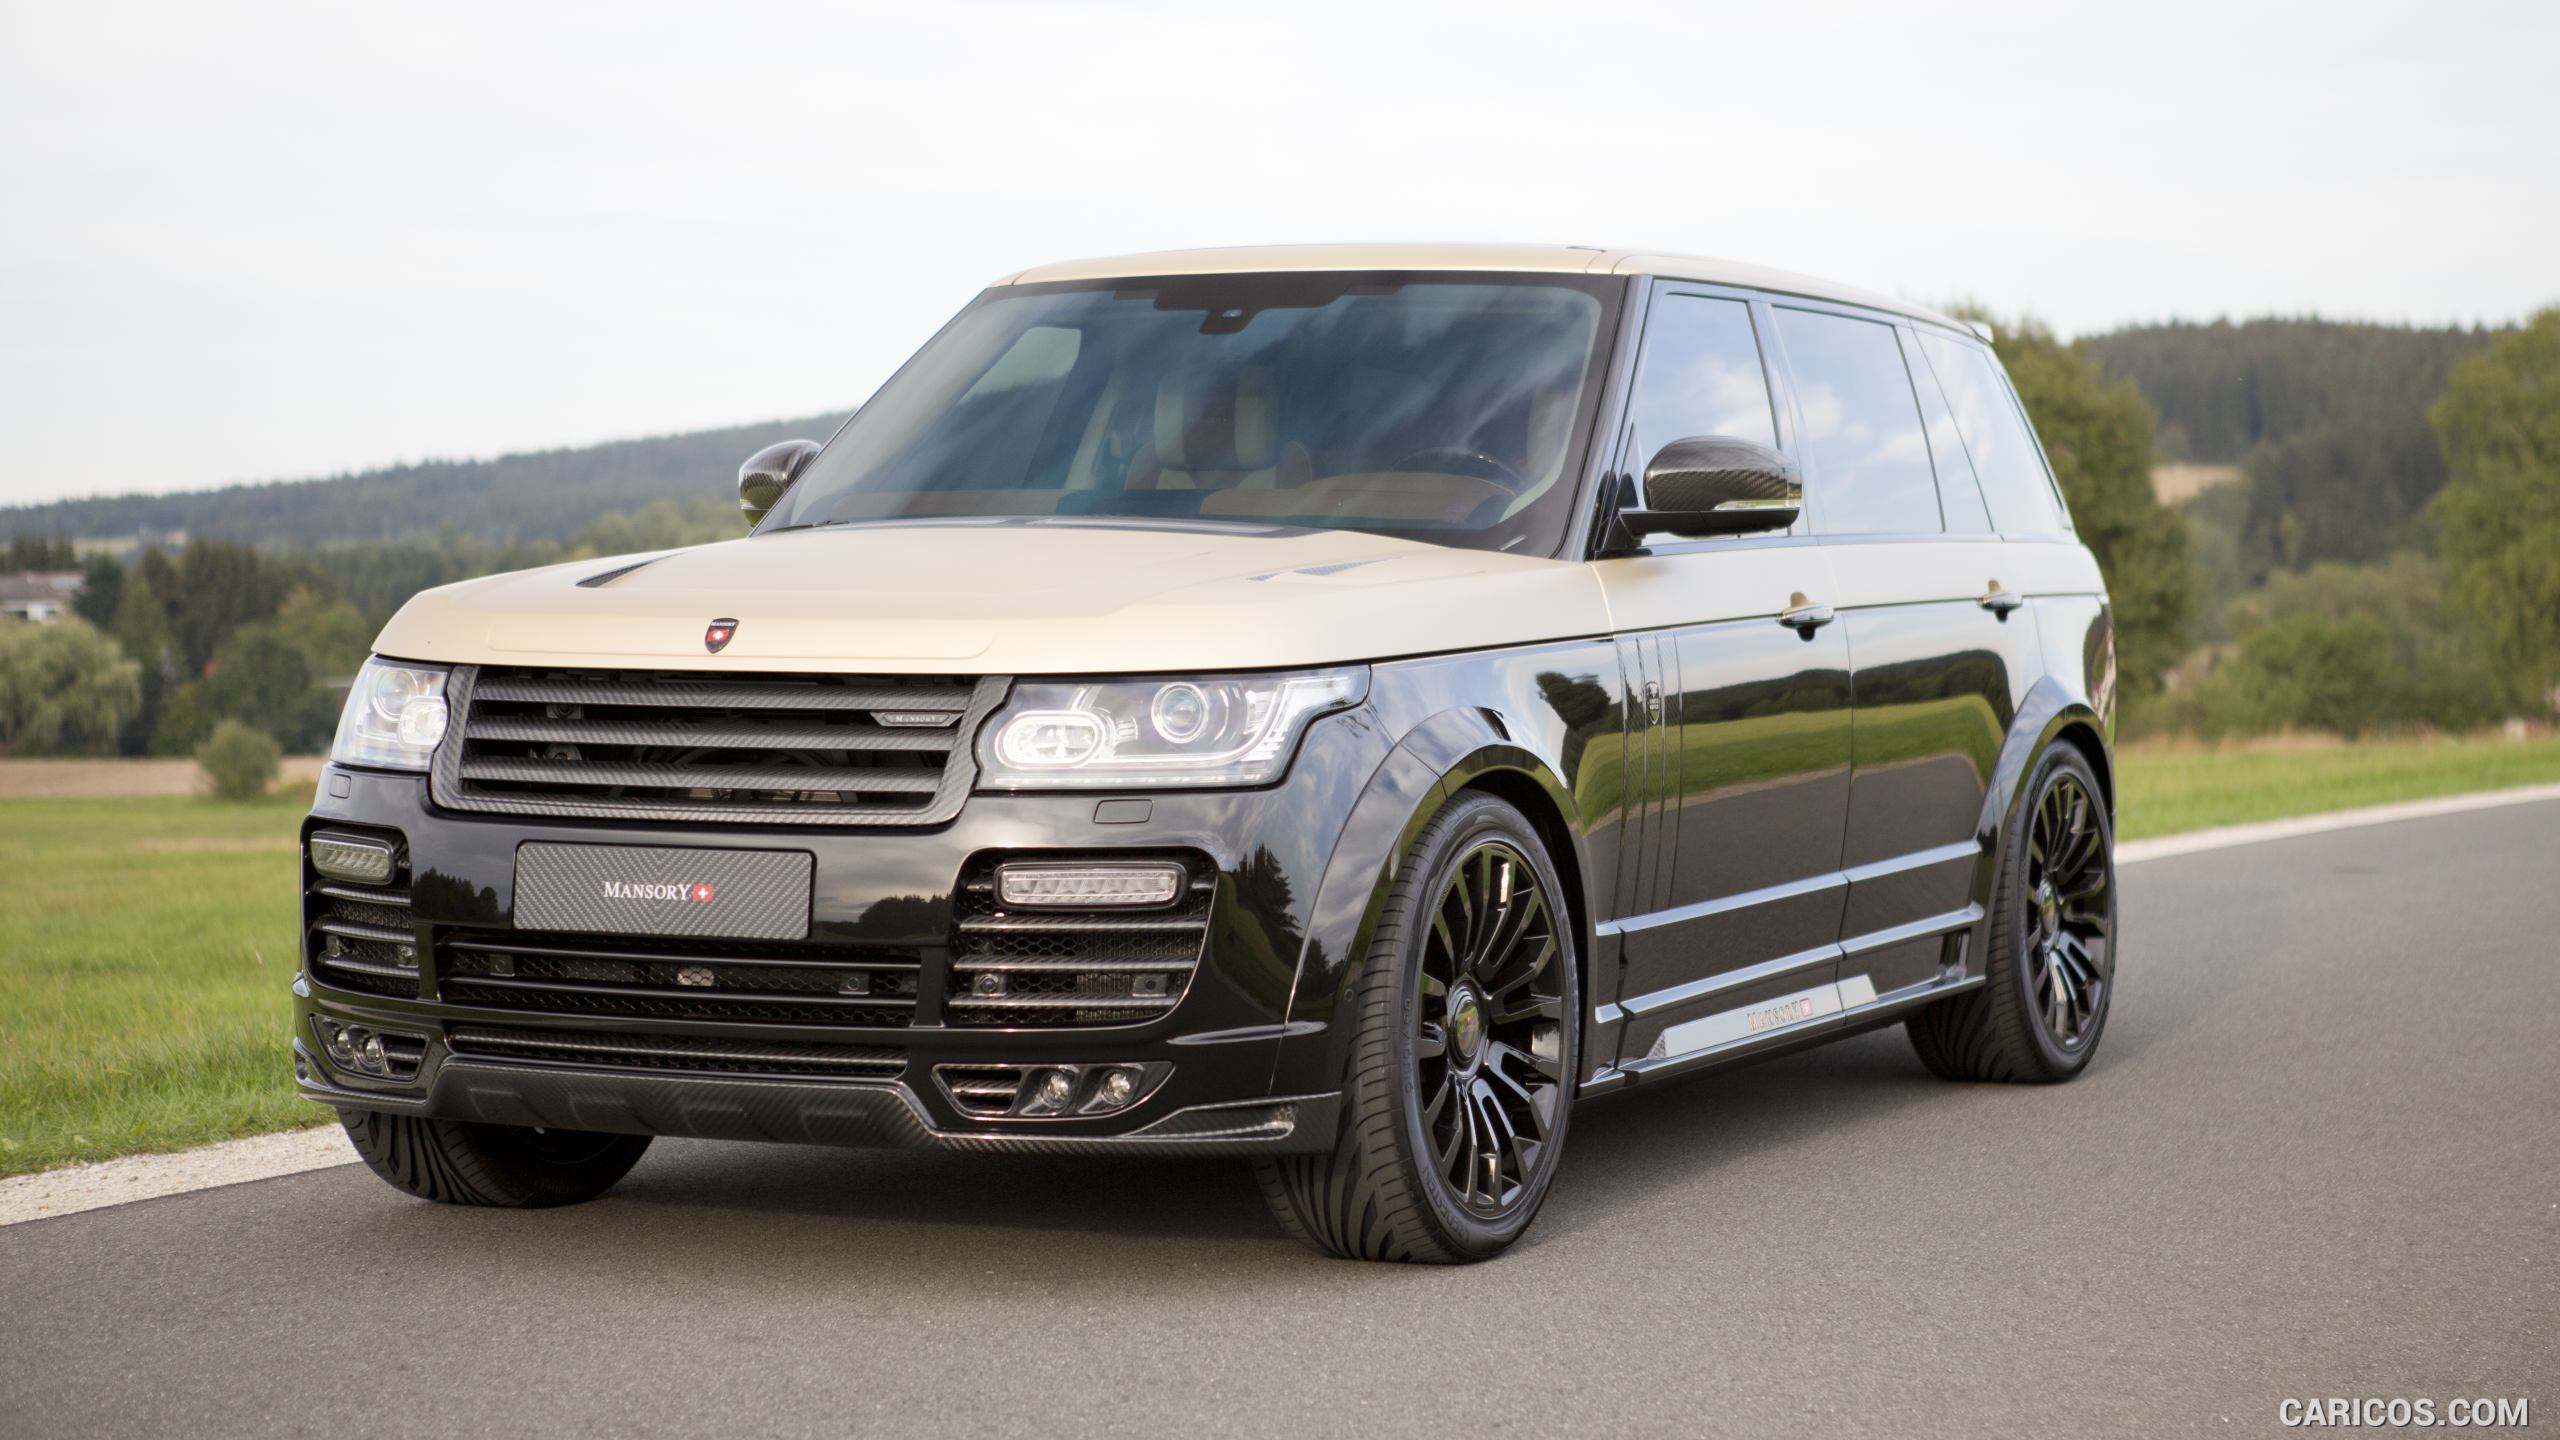 2016 MANSORY Range Rover Autobiography Extended - Front, #1 of 12